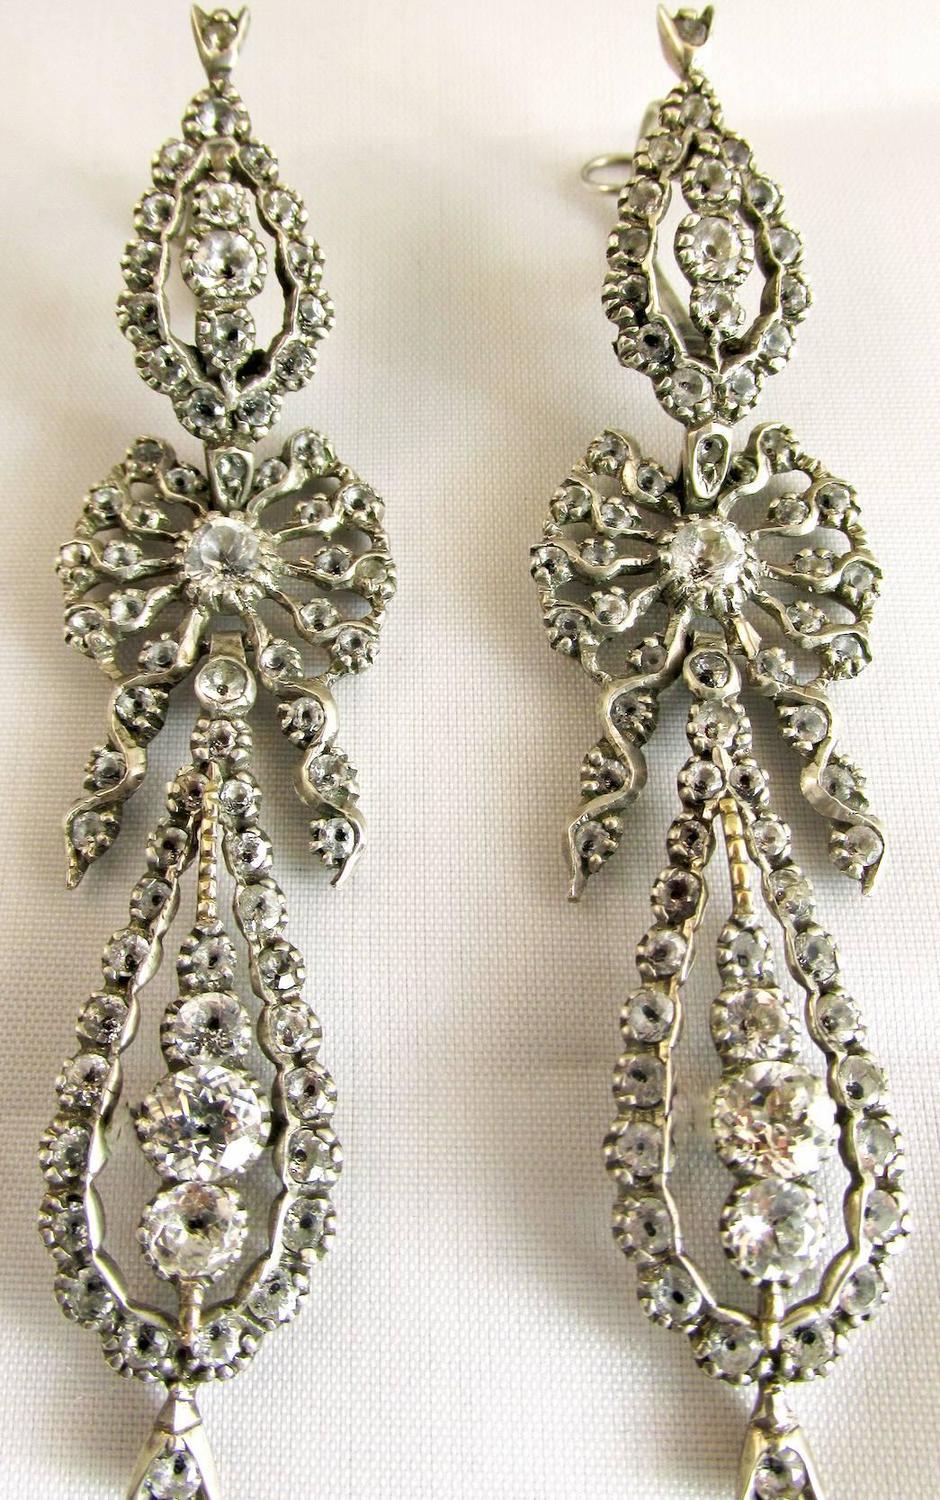 Antique Portuguese Paste and Silver Earrings For Sale at 1stdibs